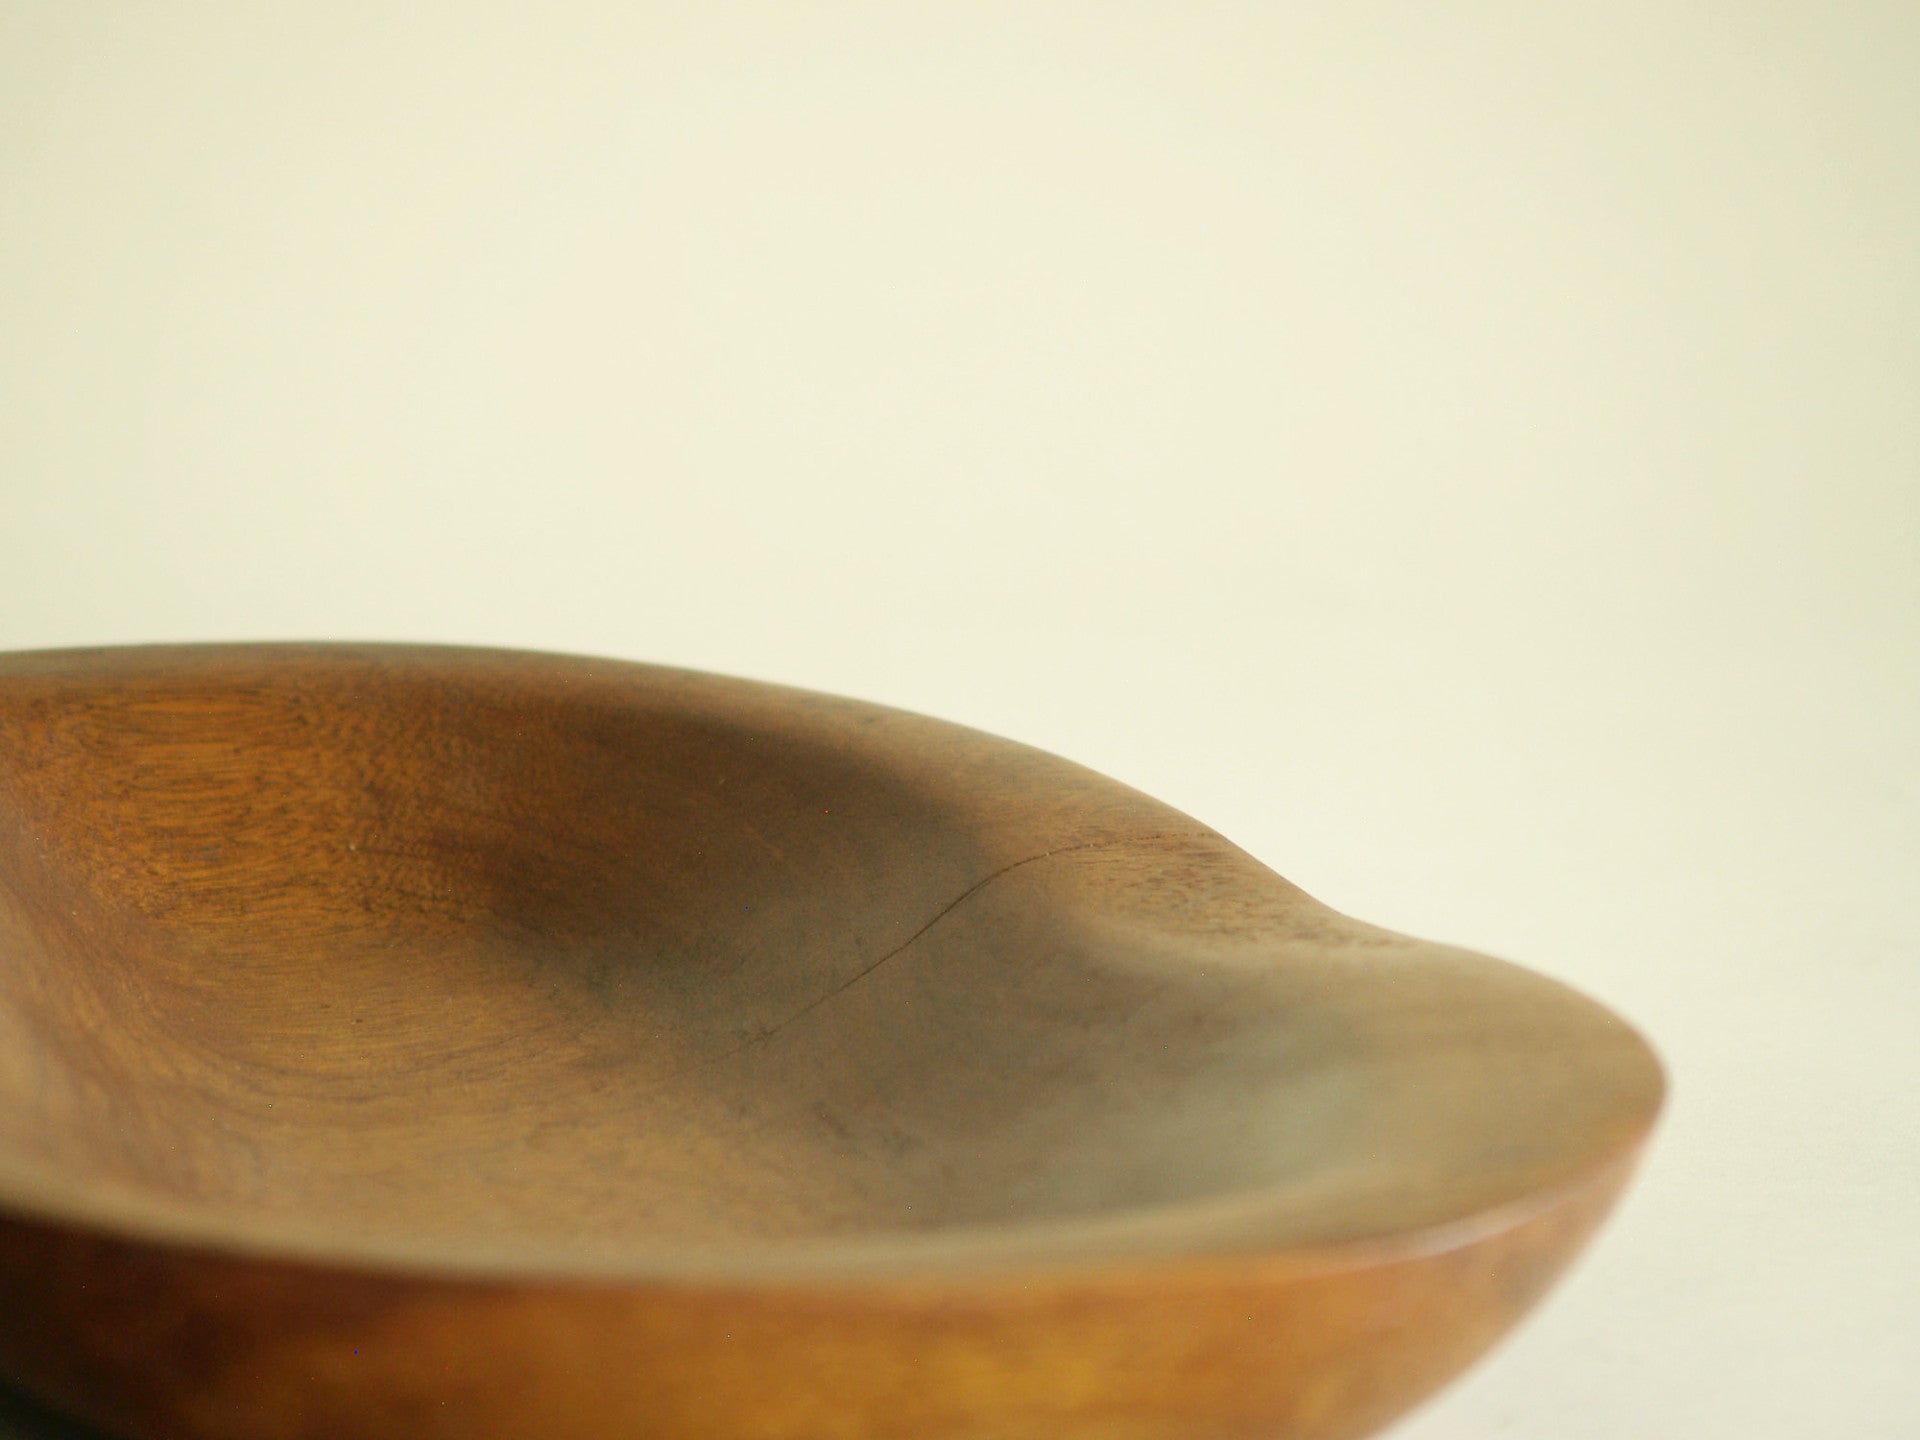 Coupe monoxyle ovale en sycomore, France (vers 1960)..Sycamore Ovoïd carved bowl, France (circa 1960)